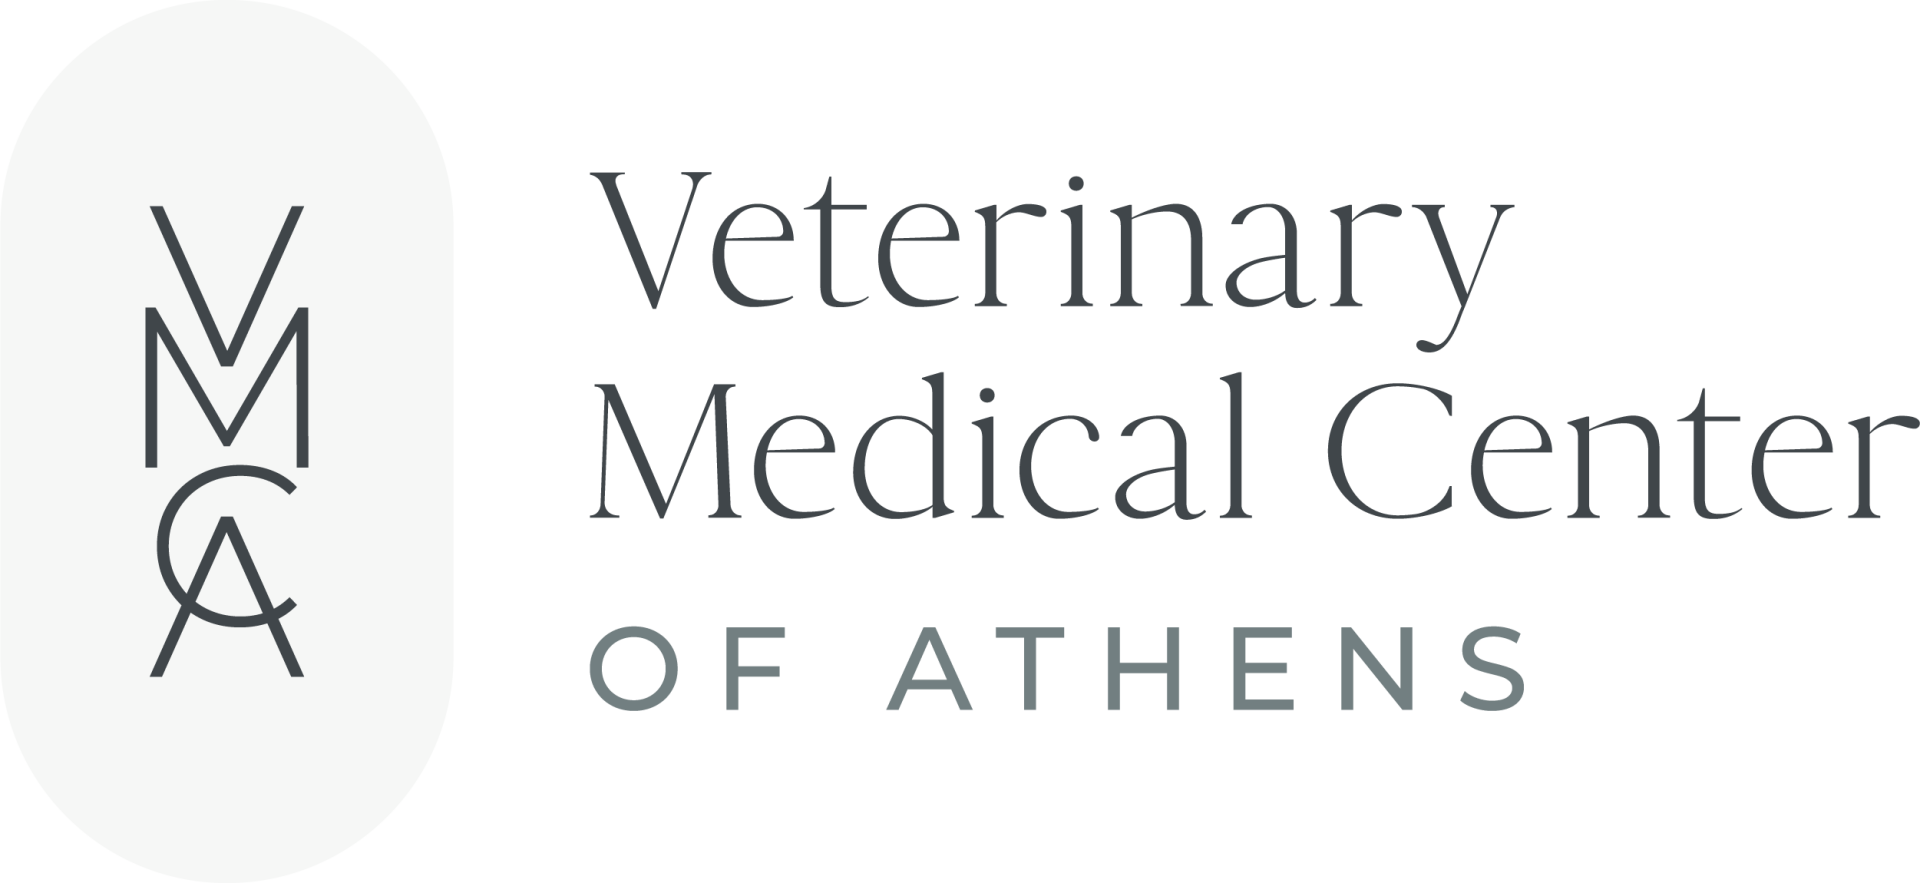 Veterinary Medical Center of Athens